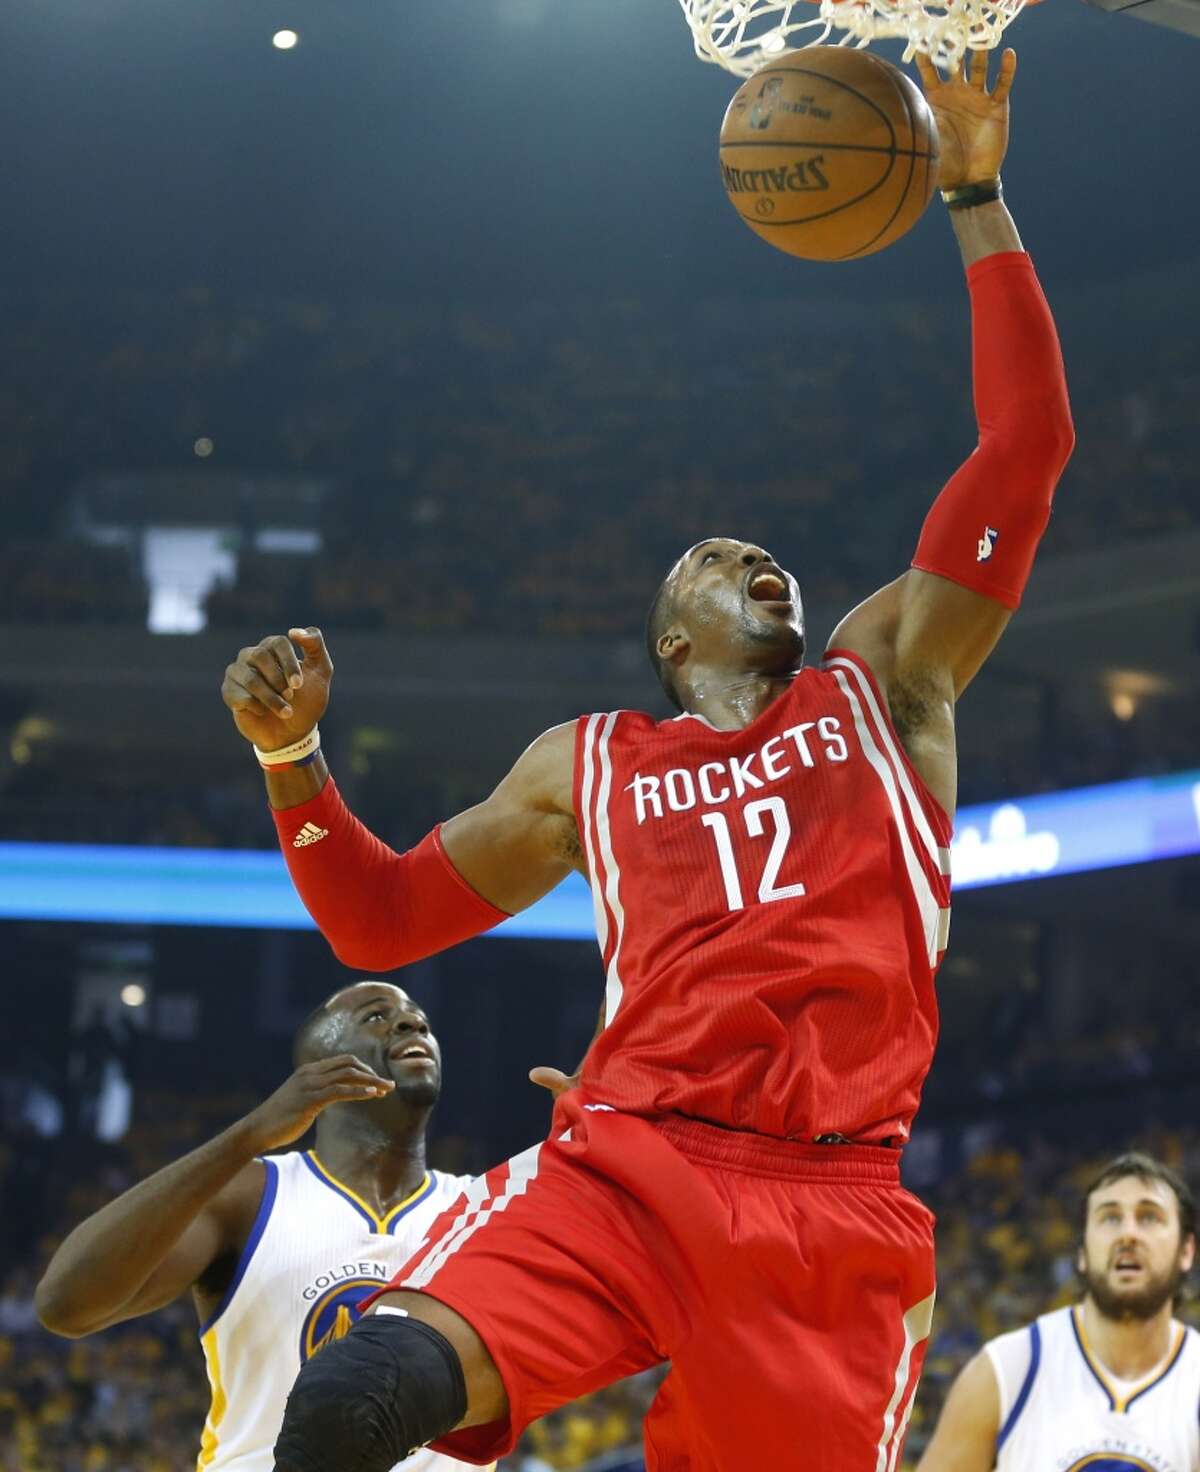 Houston Rockets center Dwight Howard (12) scores against the Golden State Warriors in the first period of Game 1 of the NBA Western Conference Finals at Oracle Arena on Tuesday, May 19, 2015, in Oakland. ( James Nielsen / Houston Chronicle )